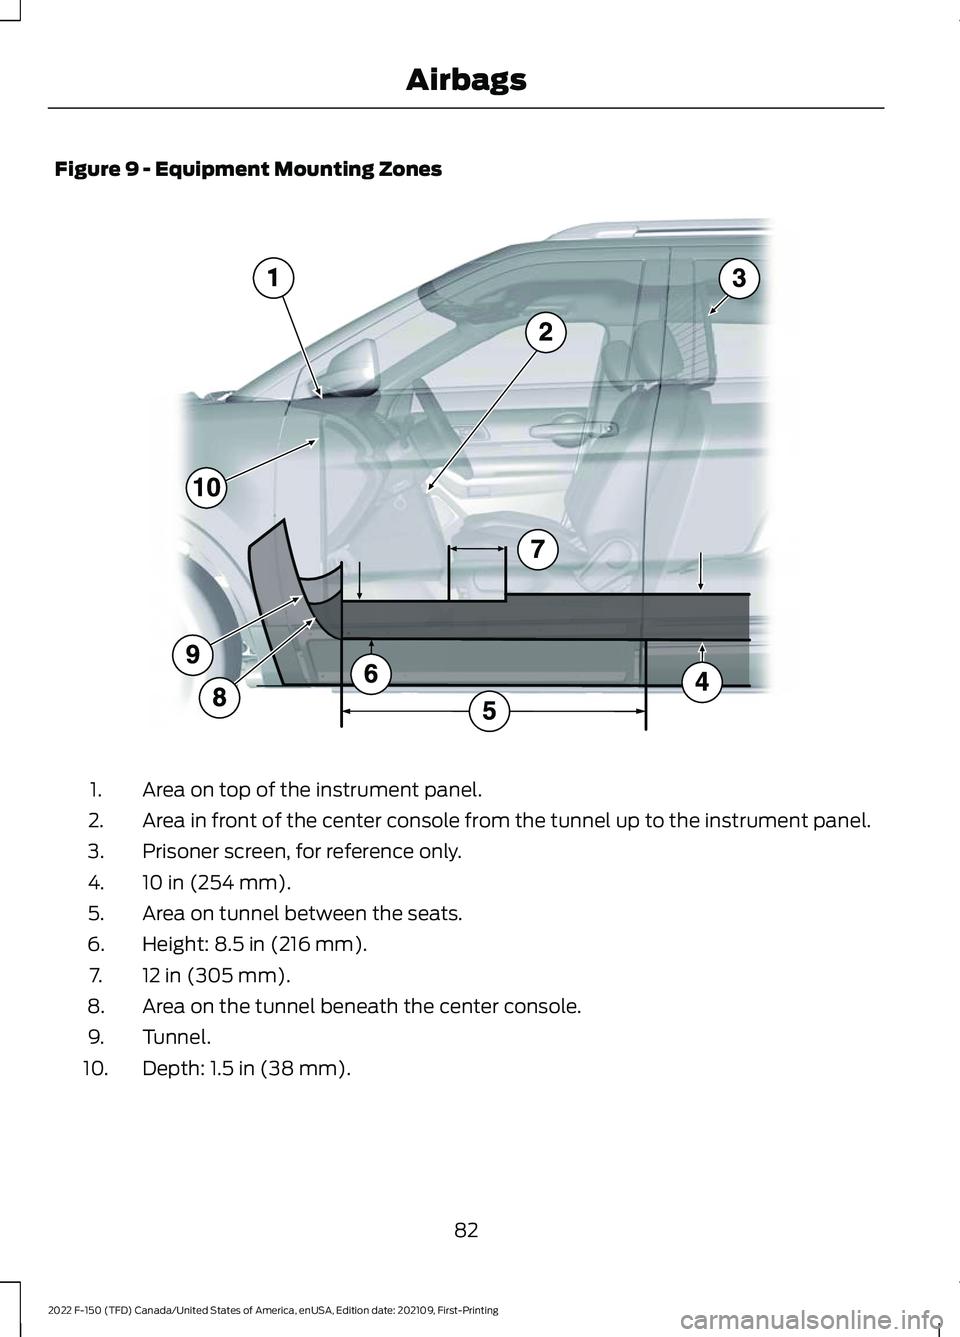 FORD F-150 2022  Owners Manual Figure 9 - Equipment Mounting Zones
Area on top of the instrument panel.
1.
Area in front of the center console from the tunnel up to the instrument panel.
2.
Prisoner screen, for reference only.
3.
1